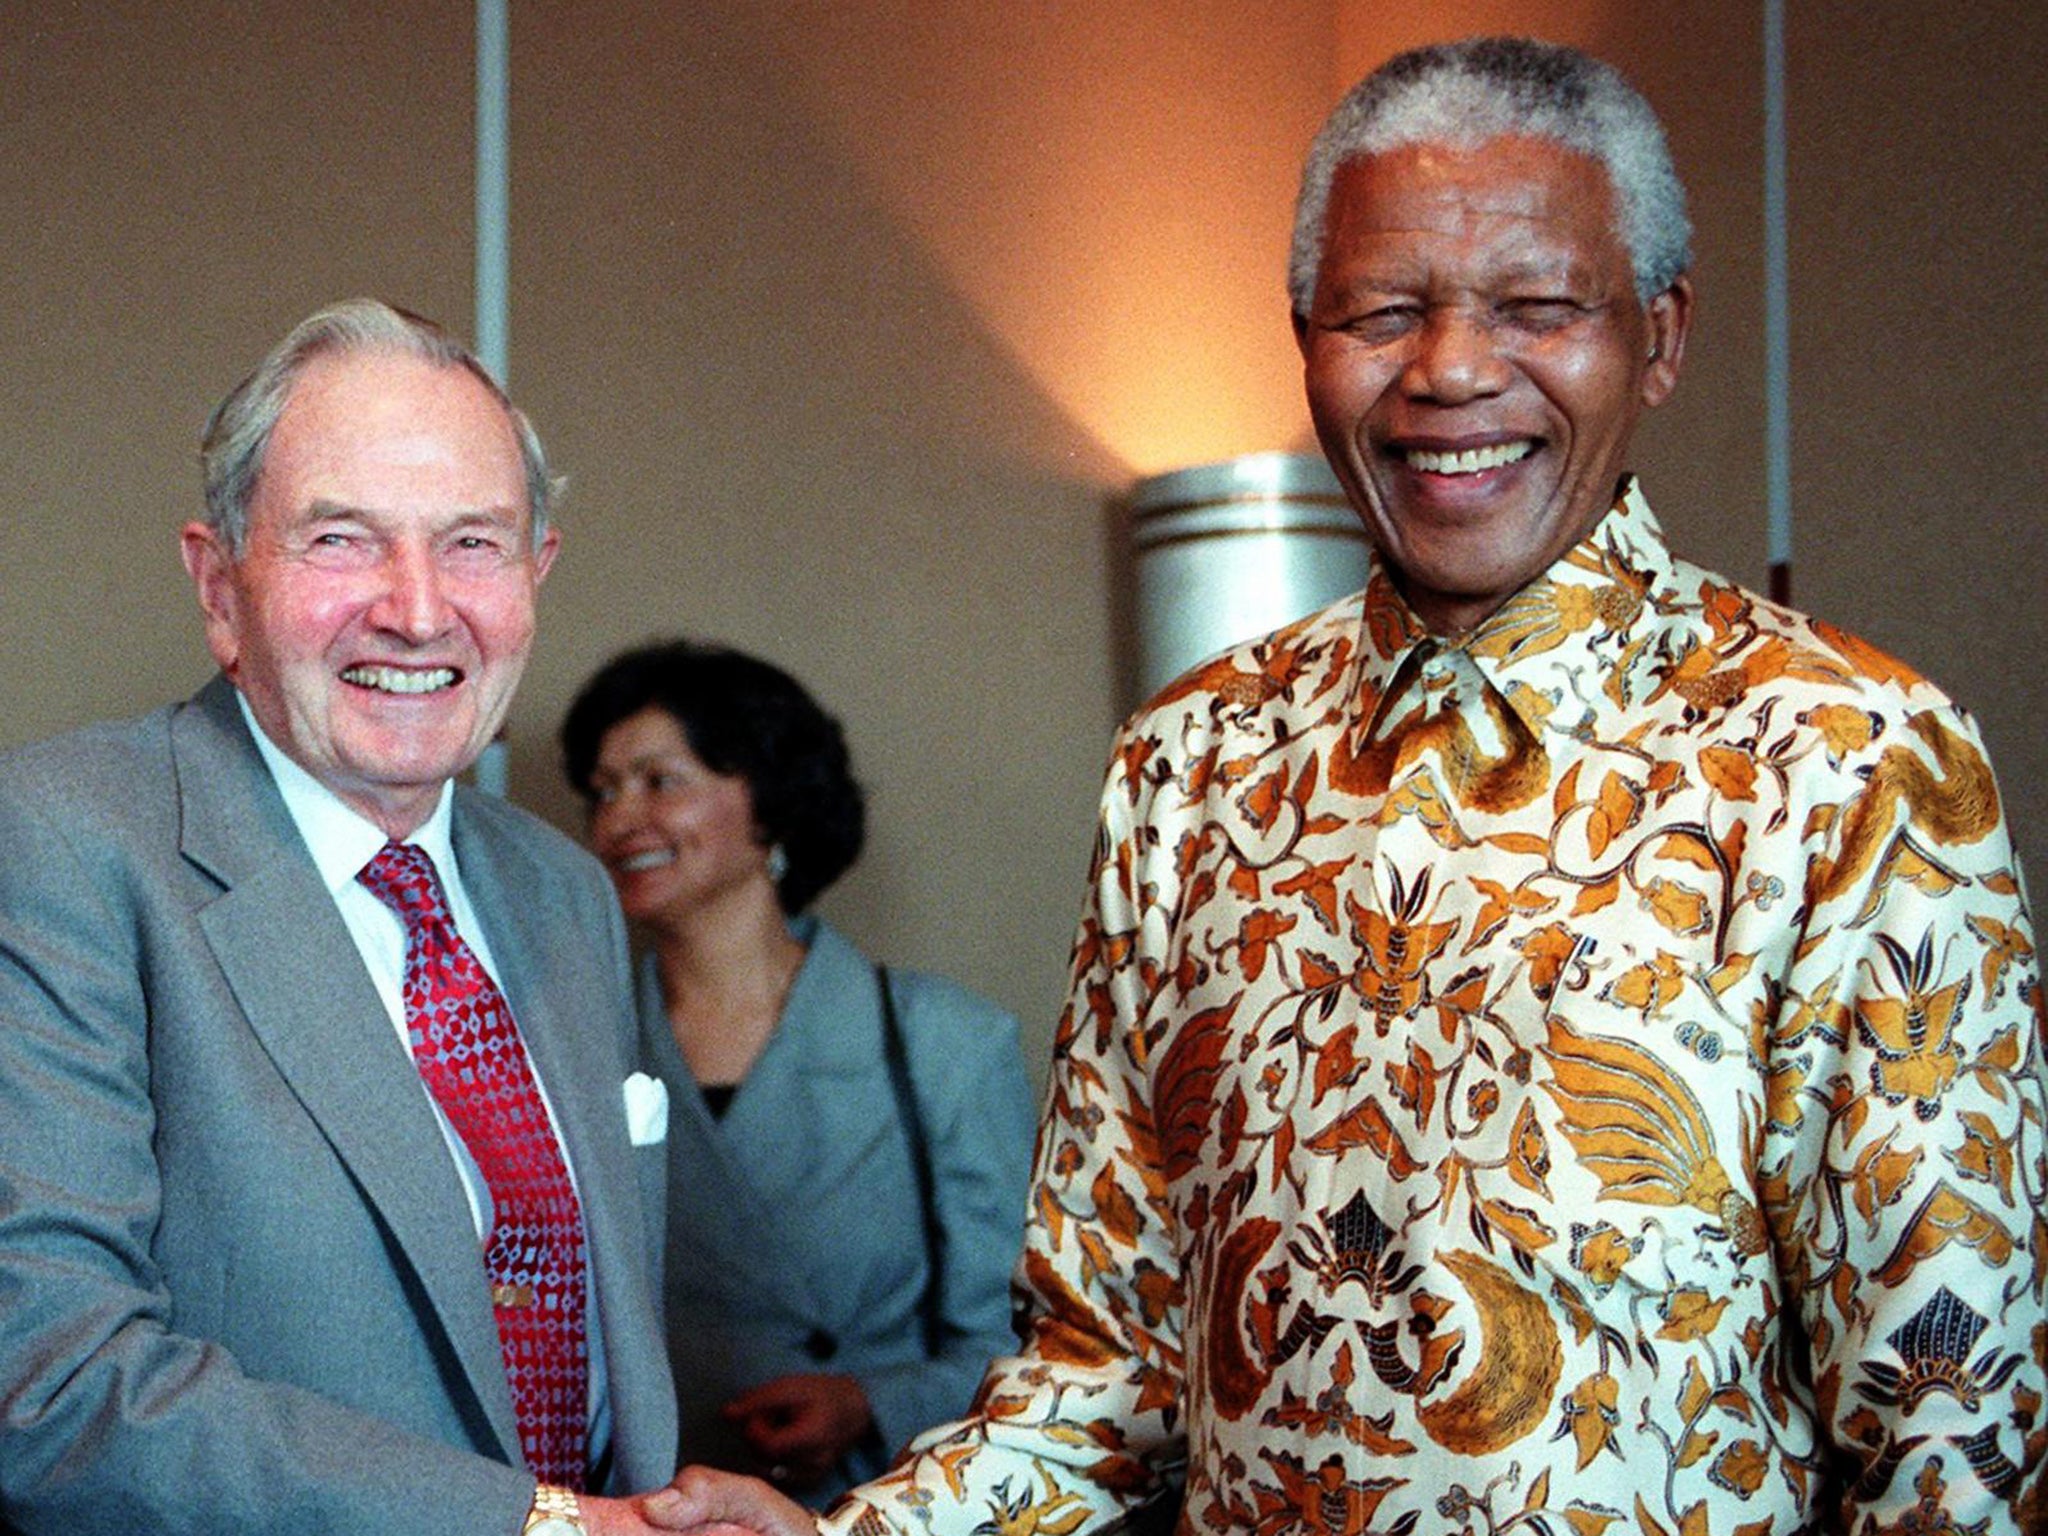 David Rockefeller, who died this week aged 101, and Nelson Mandela, in 1998